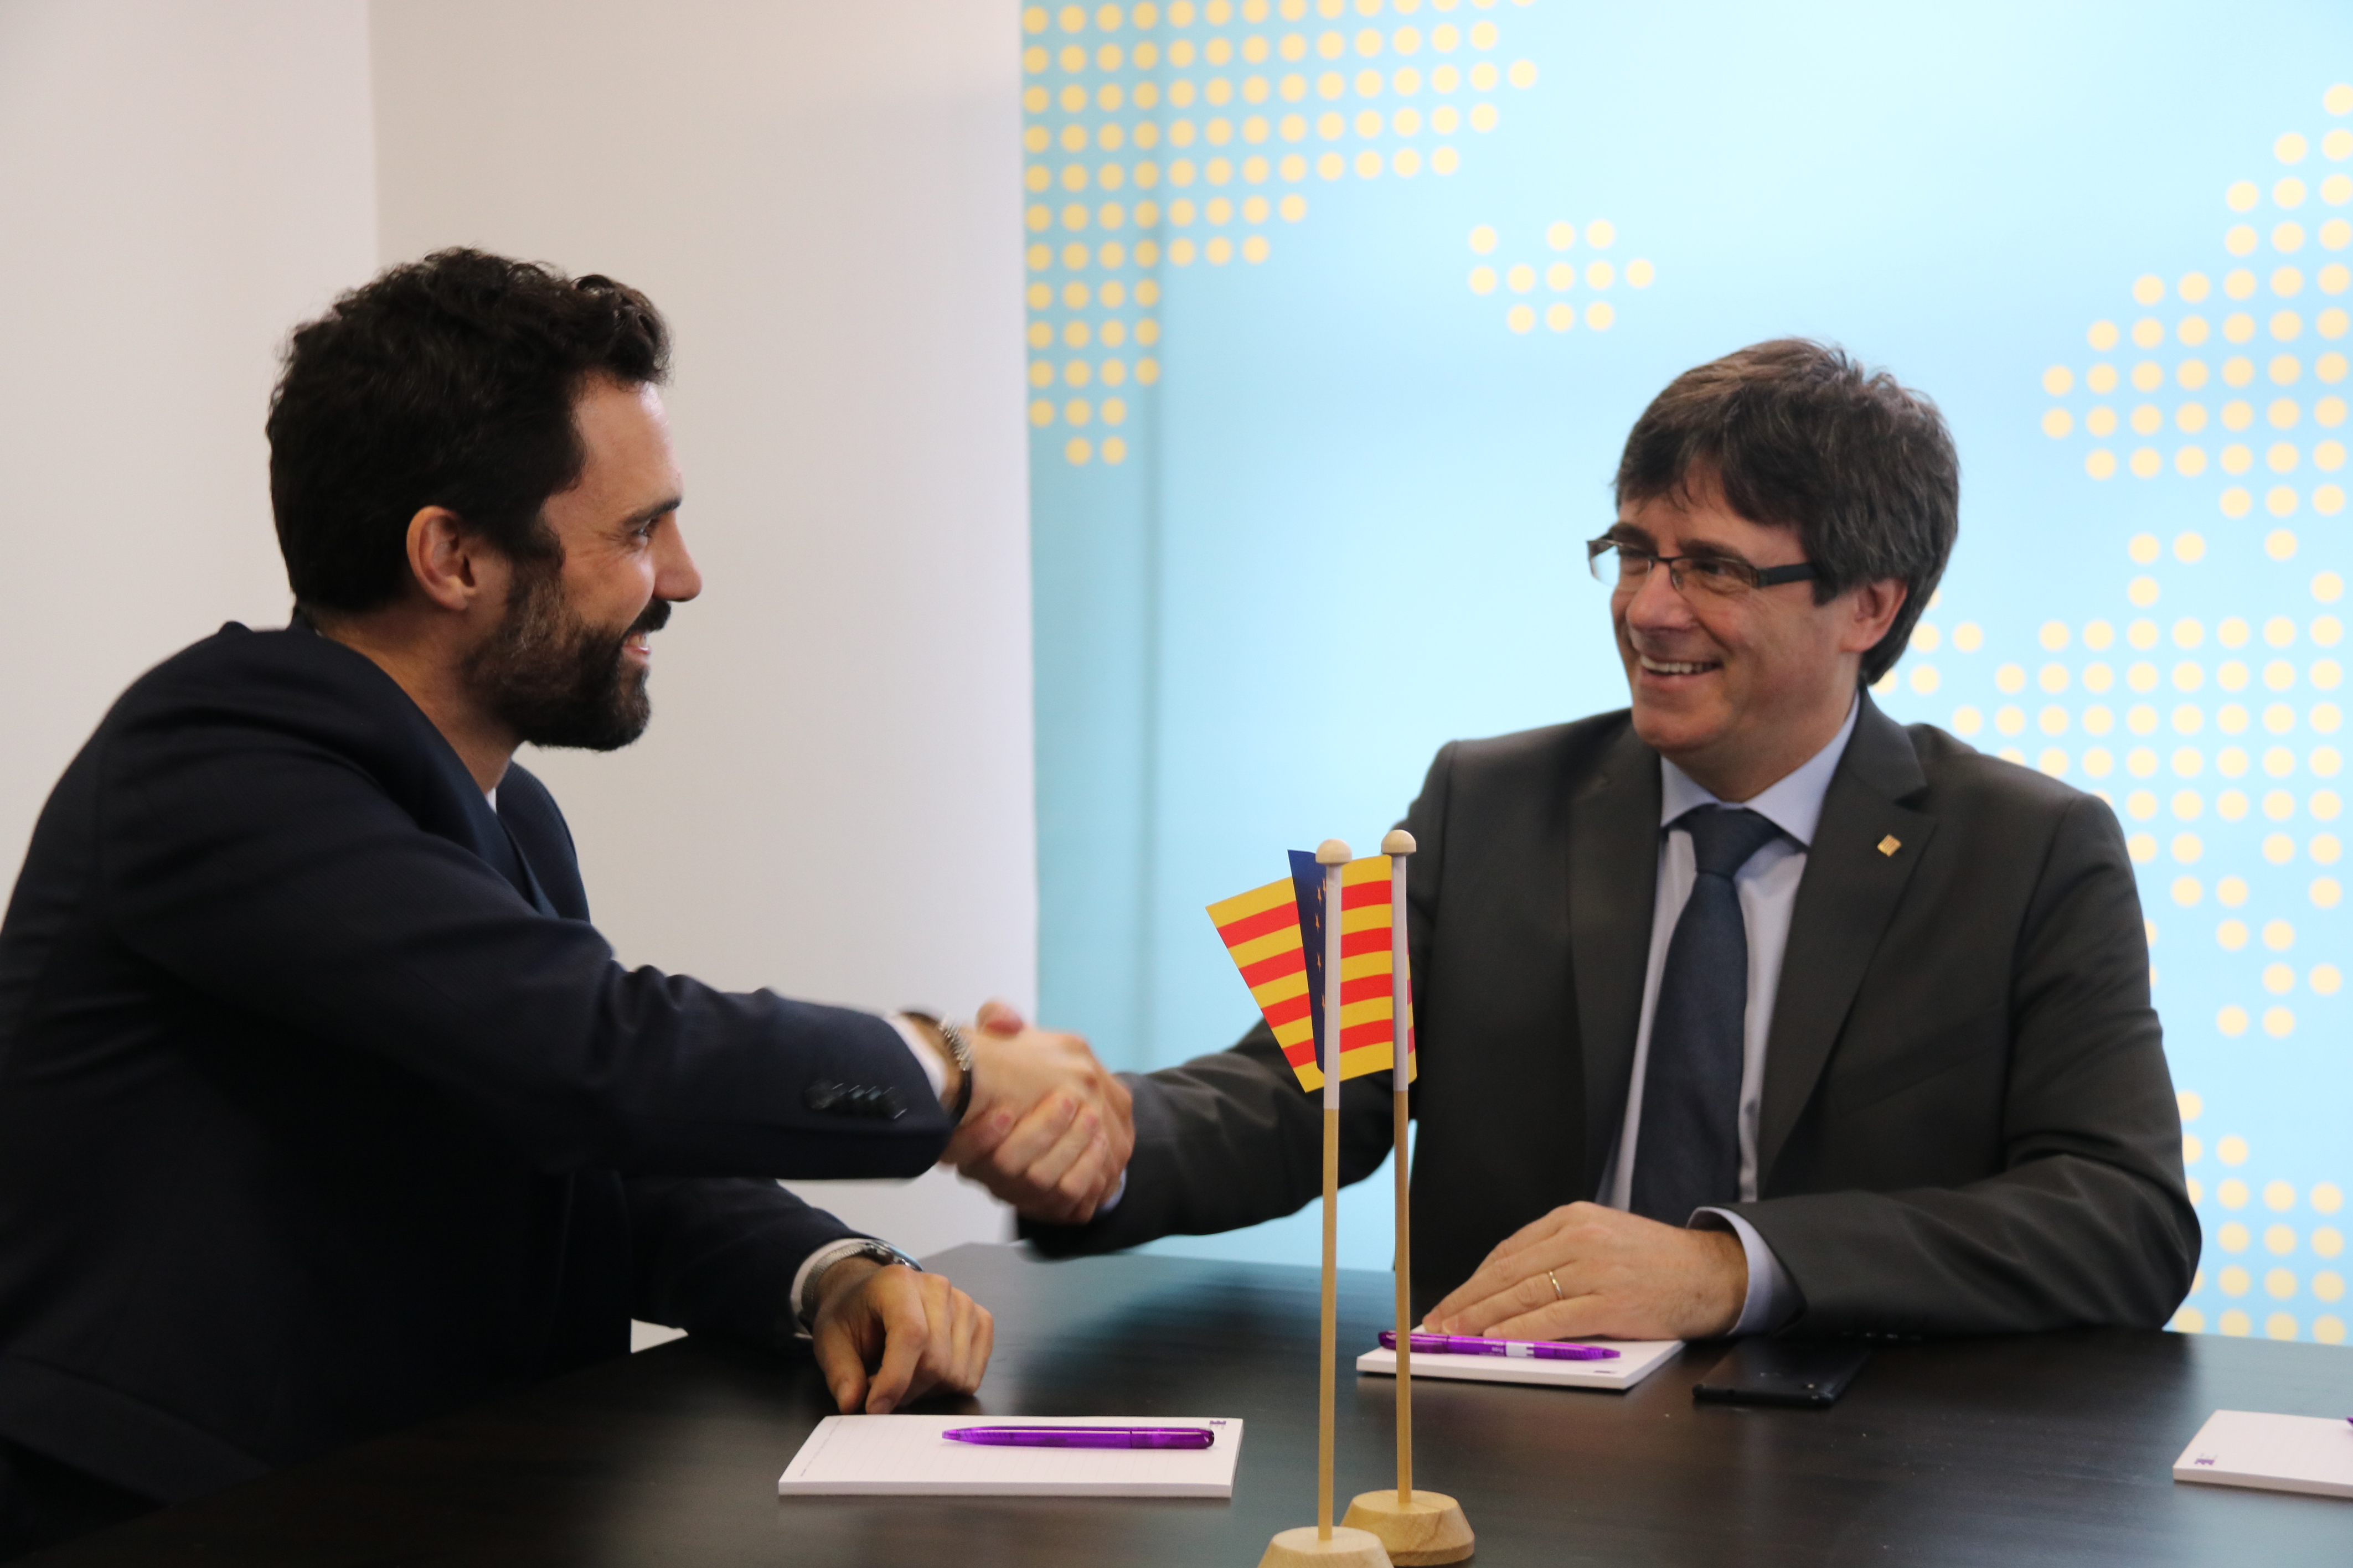 Roger Torrent and Carles Puigdemont during their meeting in Brussels (by Blanca Blay)